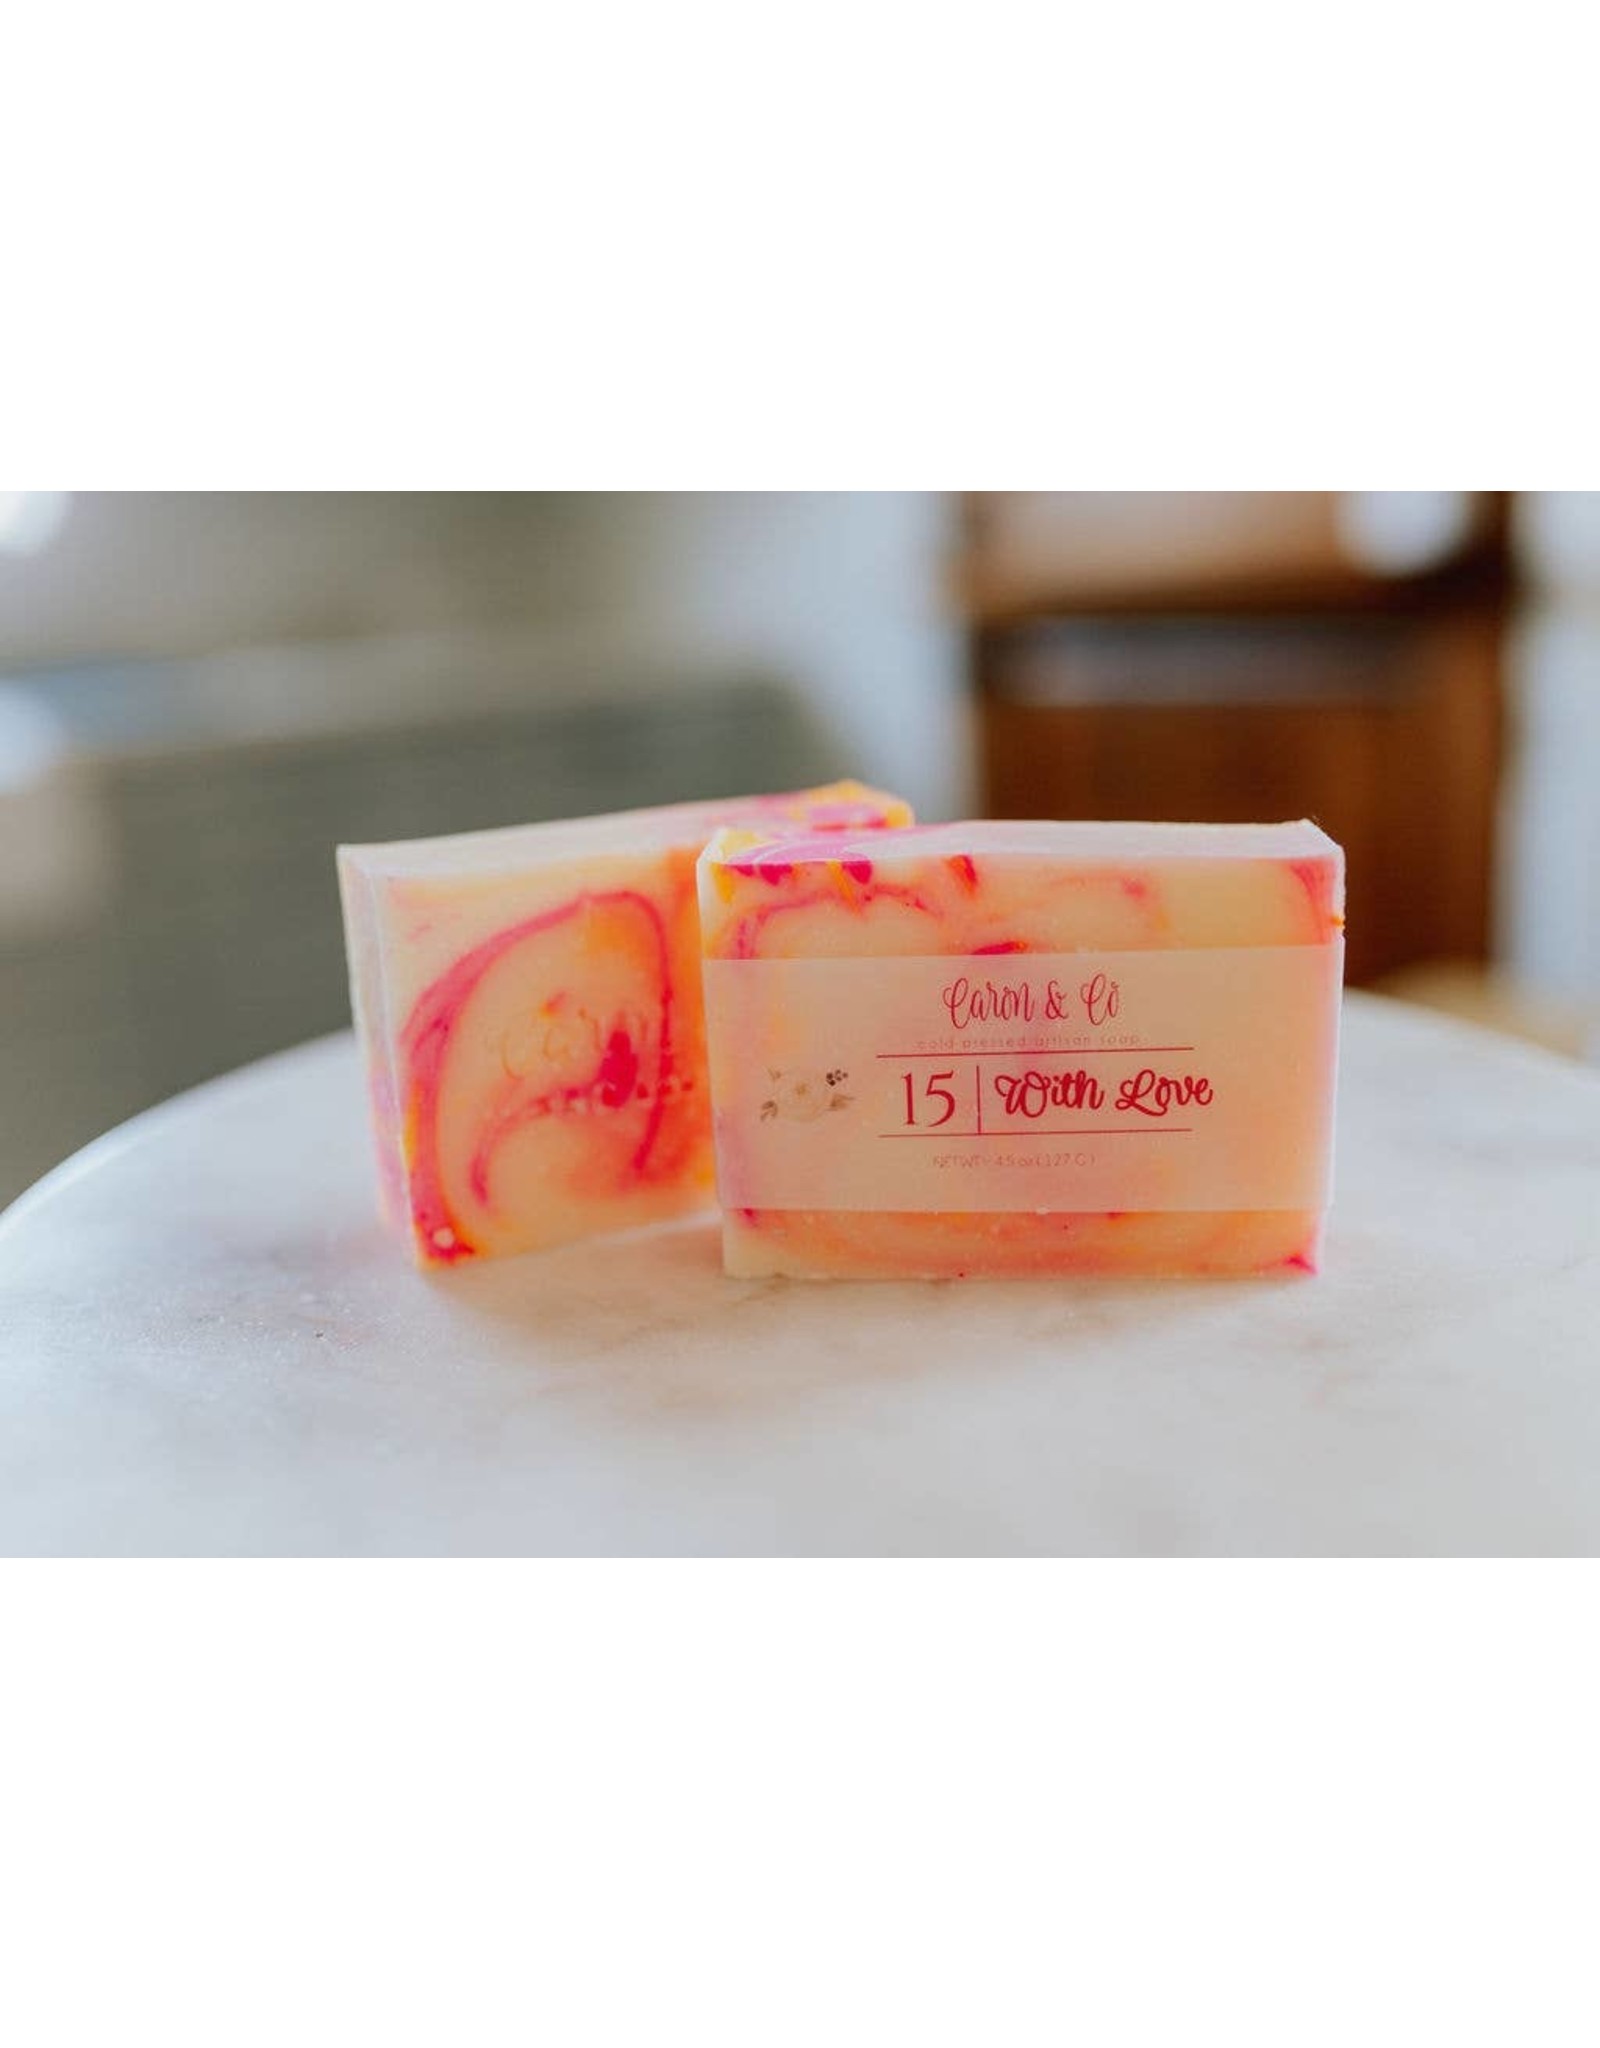 Caron & Co Bath and Body With Love Soap - Slice